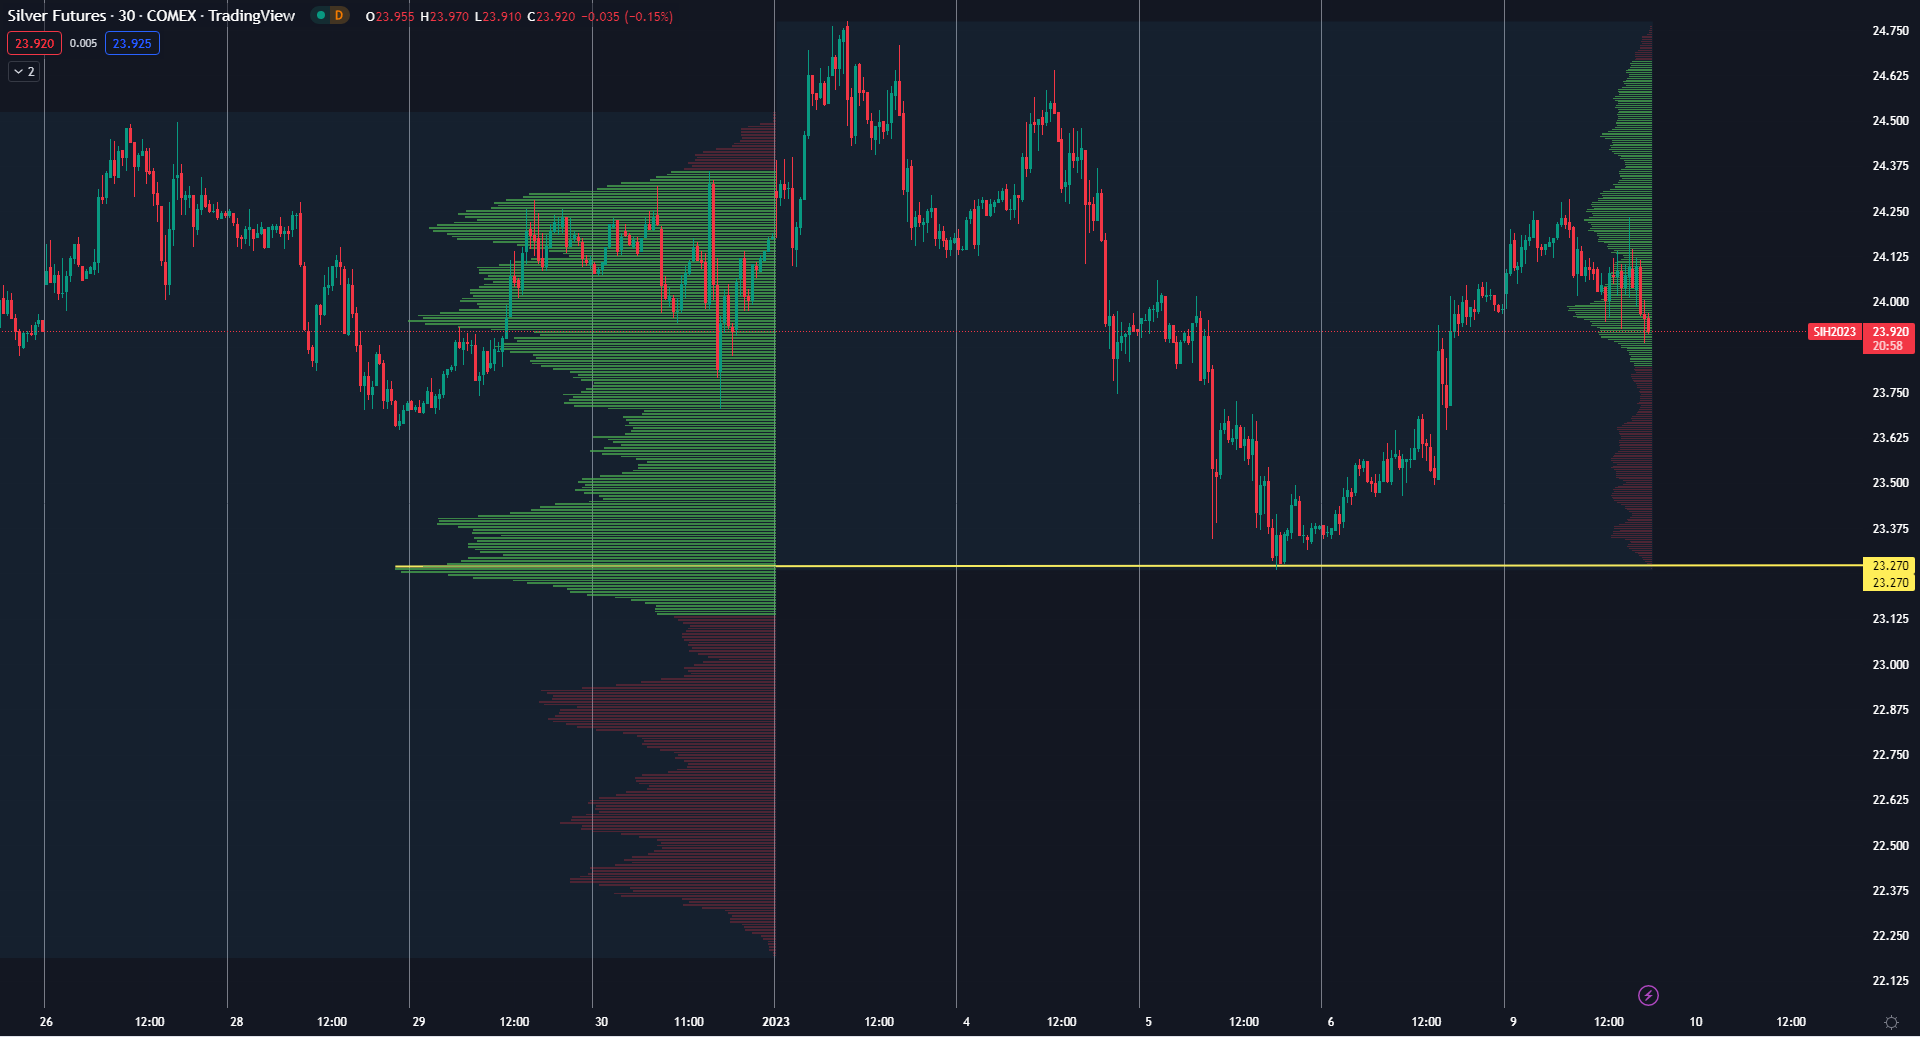 30 minutes chart of SI (Silver Futures), Monthly Market Volume Profile. Source: tradingview.com